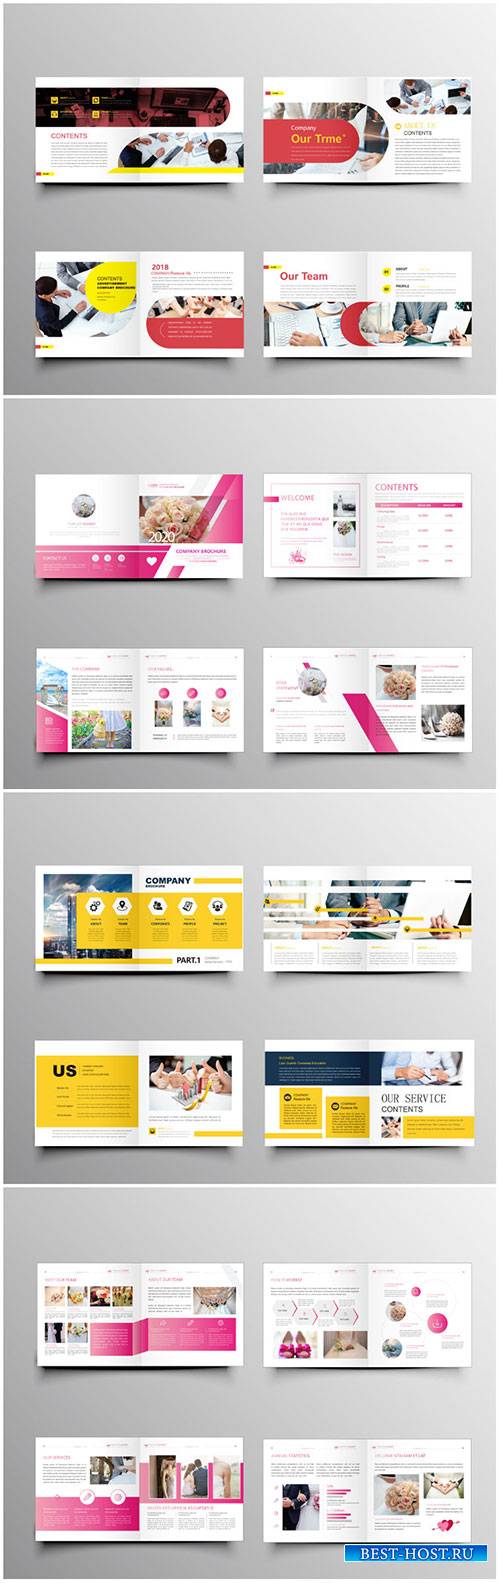 Brochure template vector layout design, corporate business annual report, magazine, flyer mockup # 227